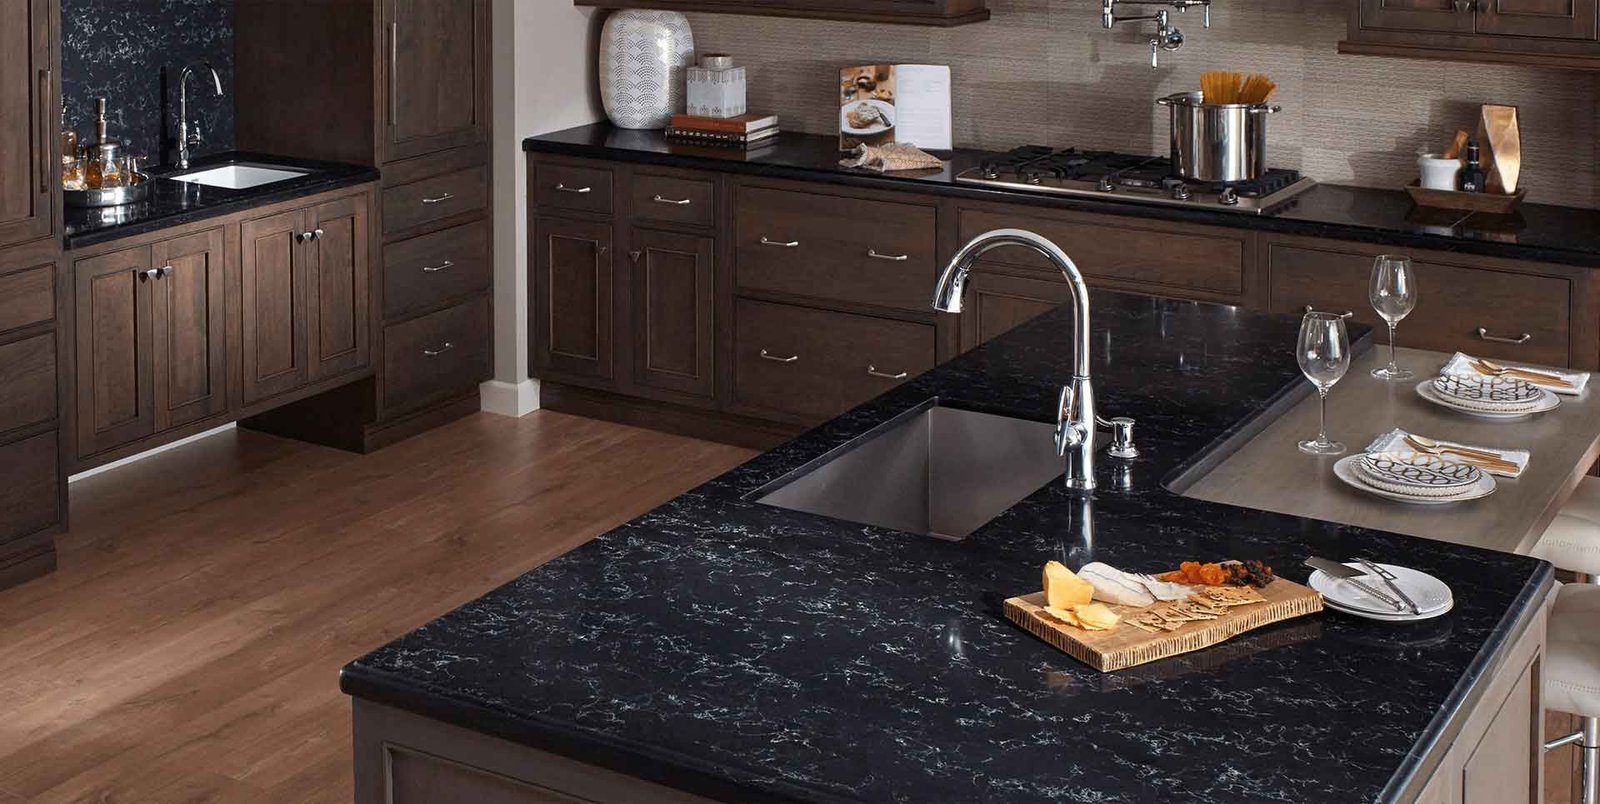 How It’s Done: Man-made Quartz Counters that Look Like Natural Stone